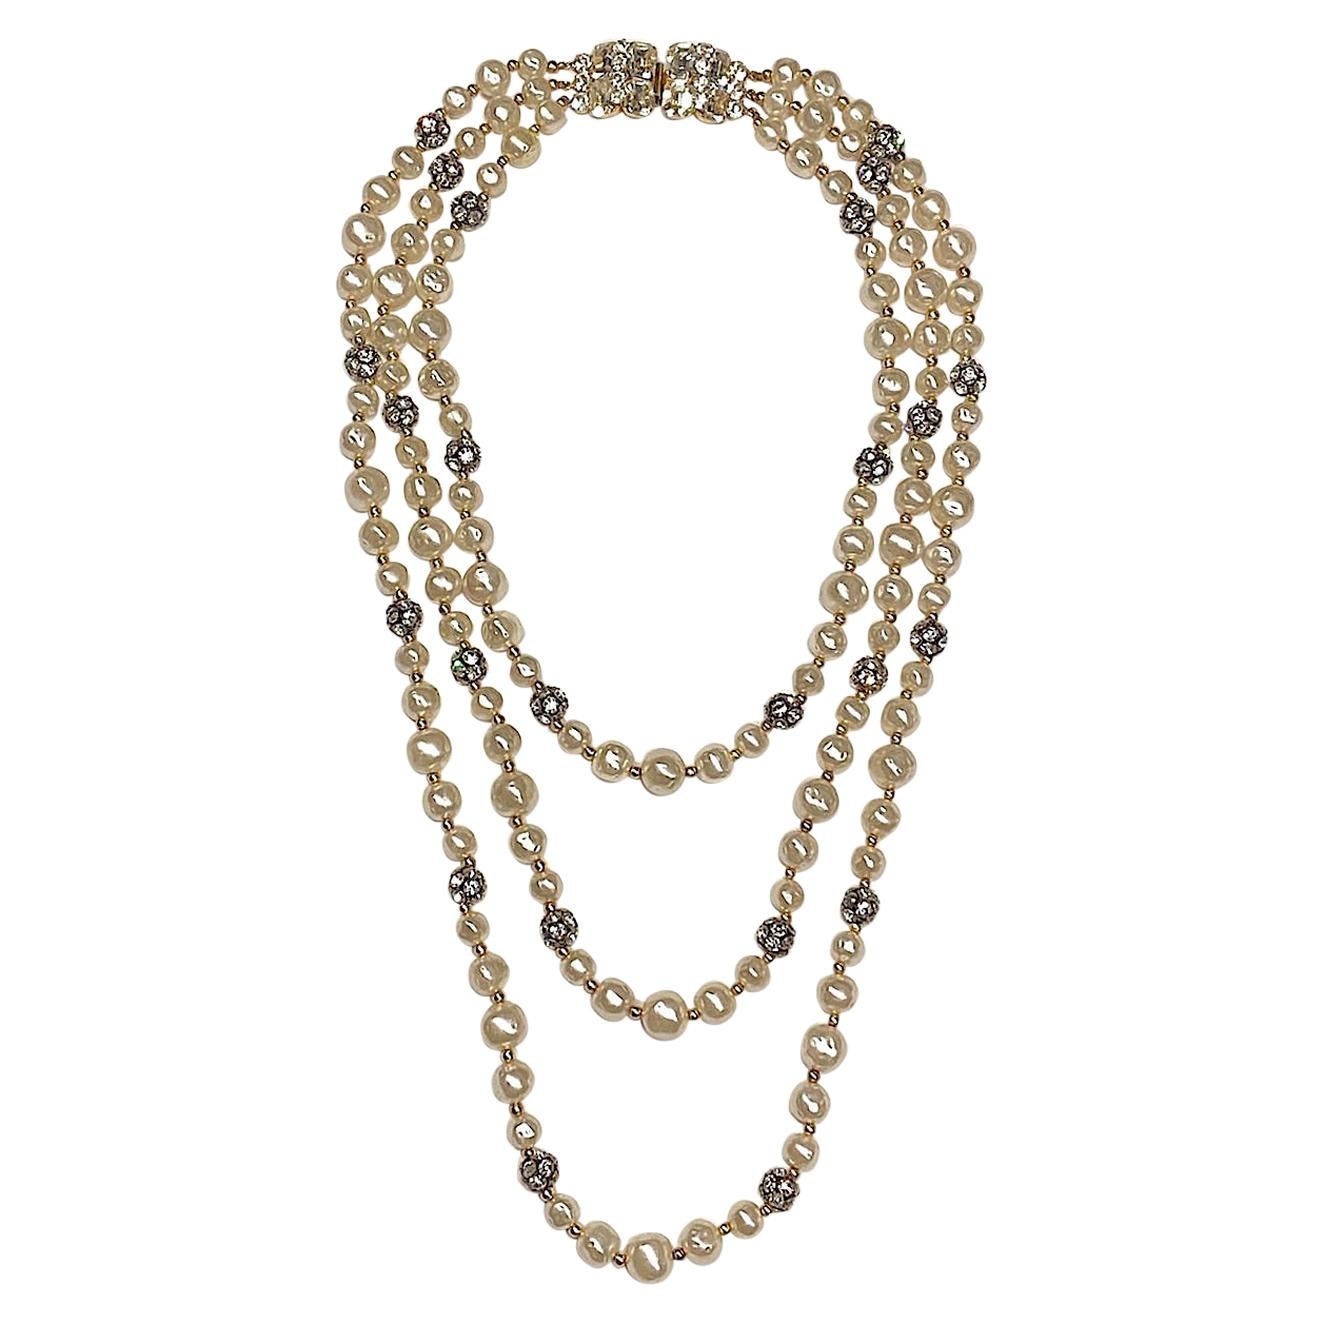 1980s 3 Strand Pearl and Rhinestone Long Necklace